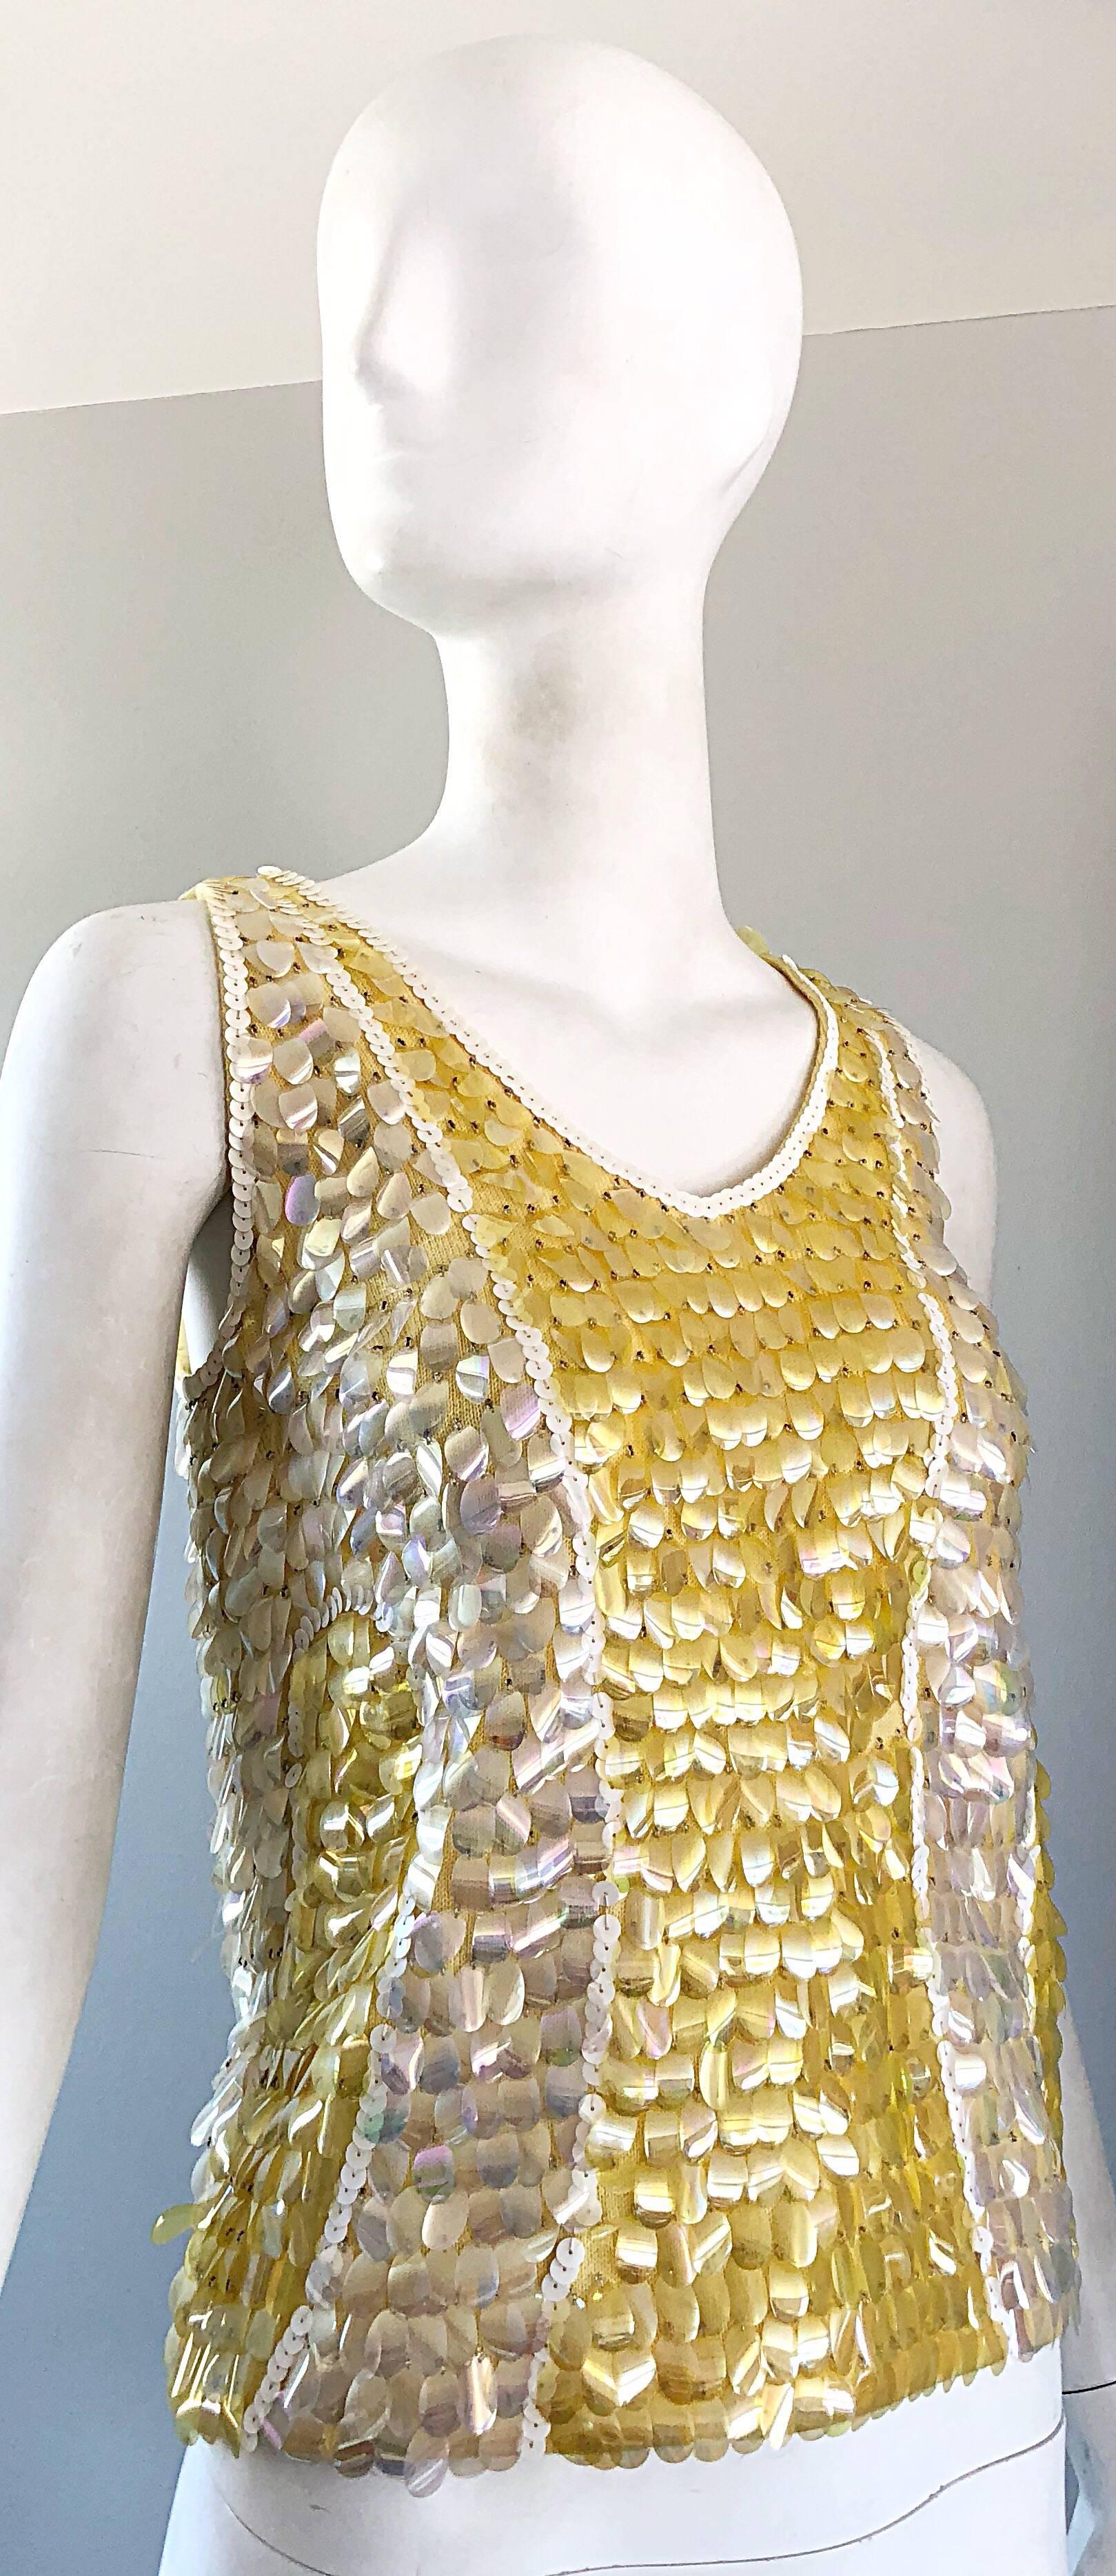 1960s Yellow + White + Clear Paillettes Sequined Lamb's Wool Sleeveless 60s Top For Sale 3